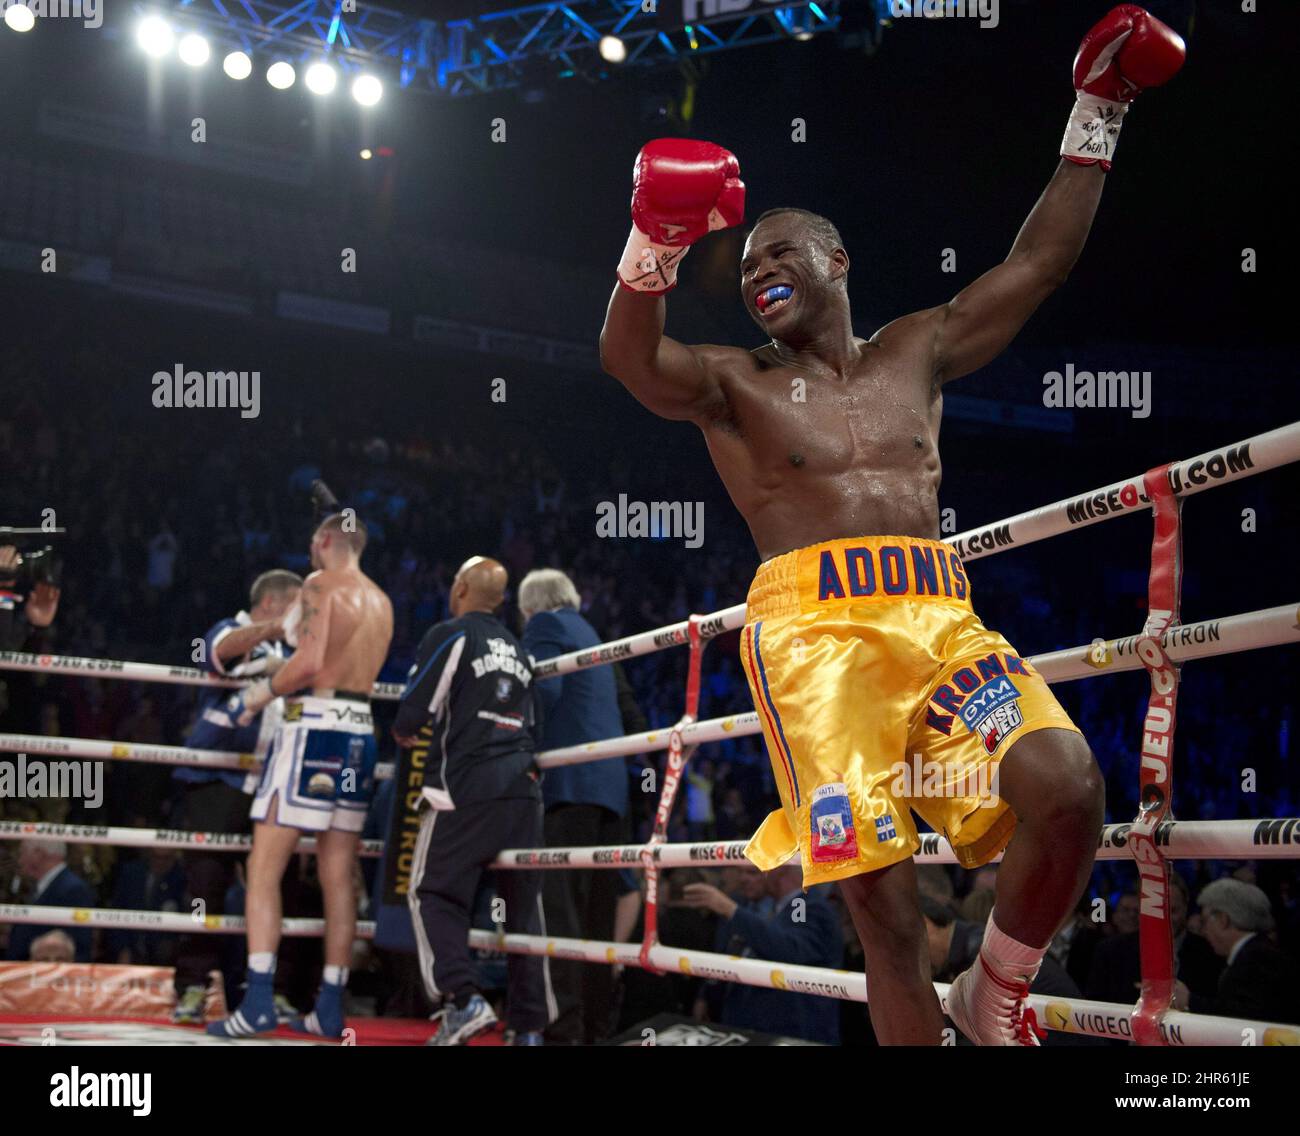 Adonis Stevenson, of Montreal, celebrates his victory against Tony Bellew,  left, of Liverpool, England, after their WBC light heavyweight world  championship fight in Quebec City, Sunday, December 1, 2013. Jean Pascal,  Stevenson,